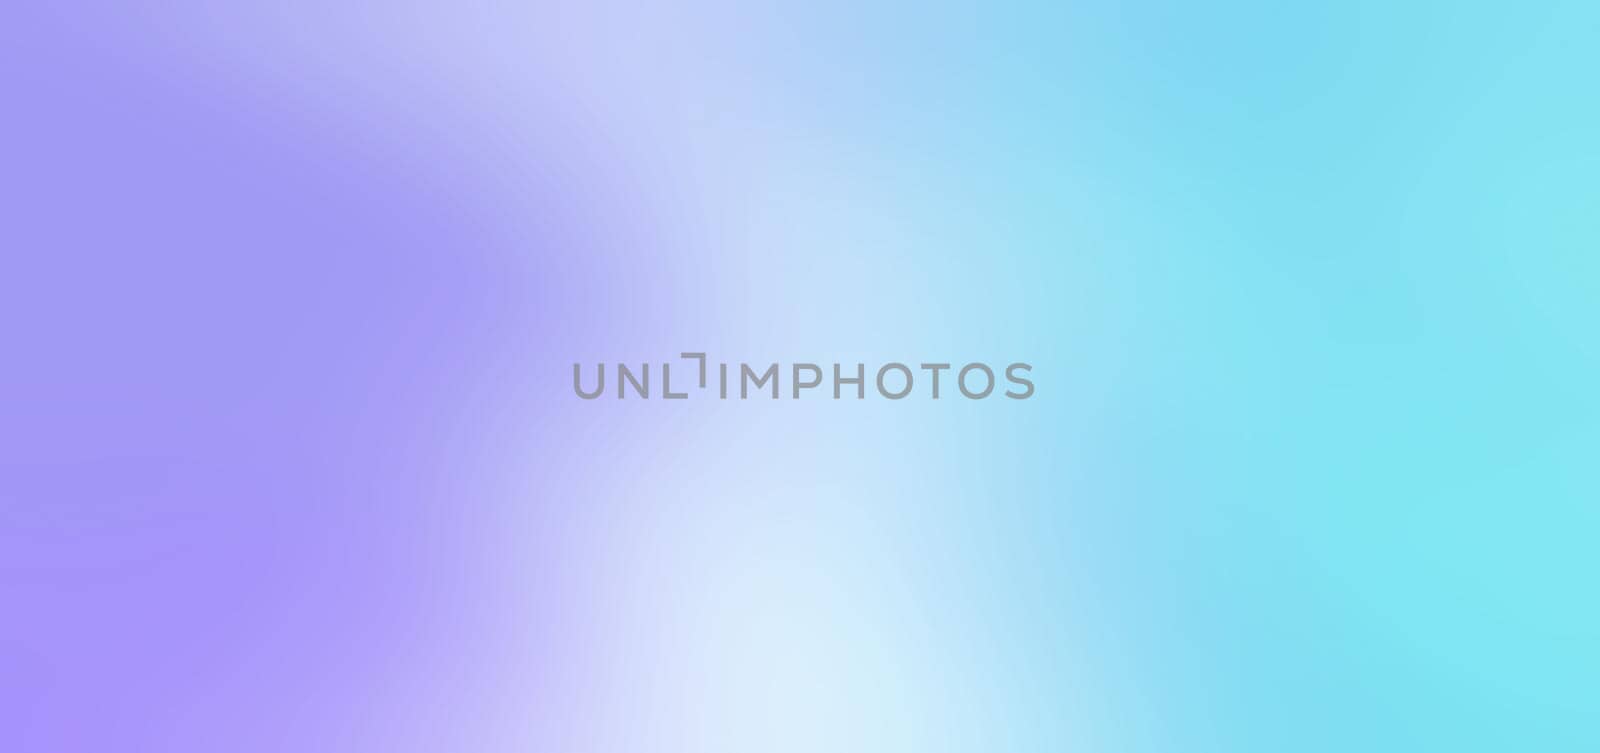 Soft blurred abstract background. Colorful texture and abstract art